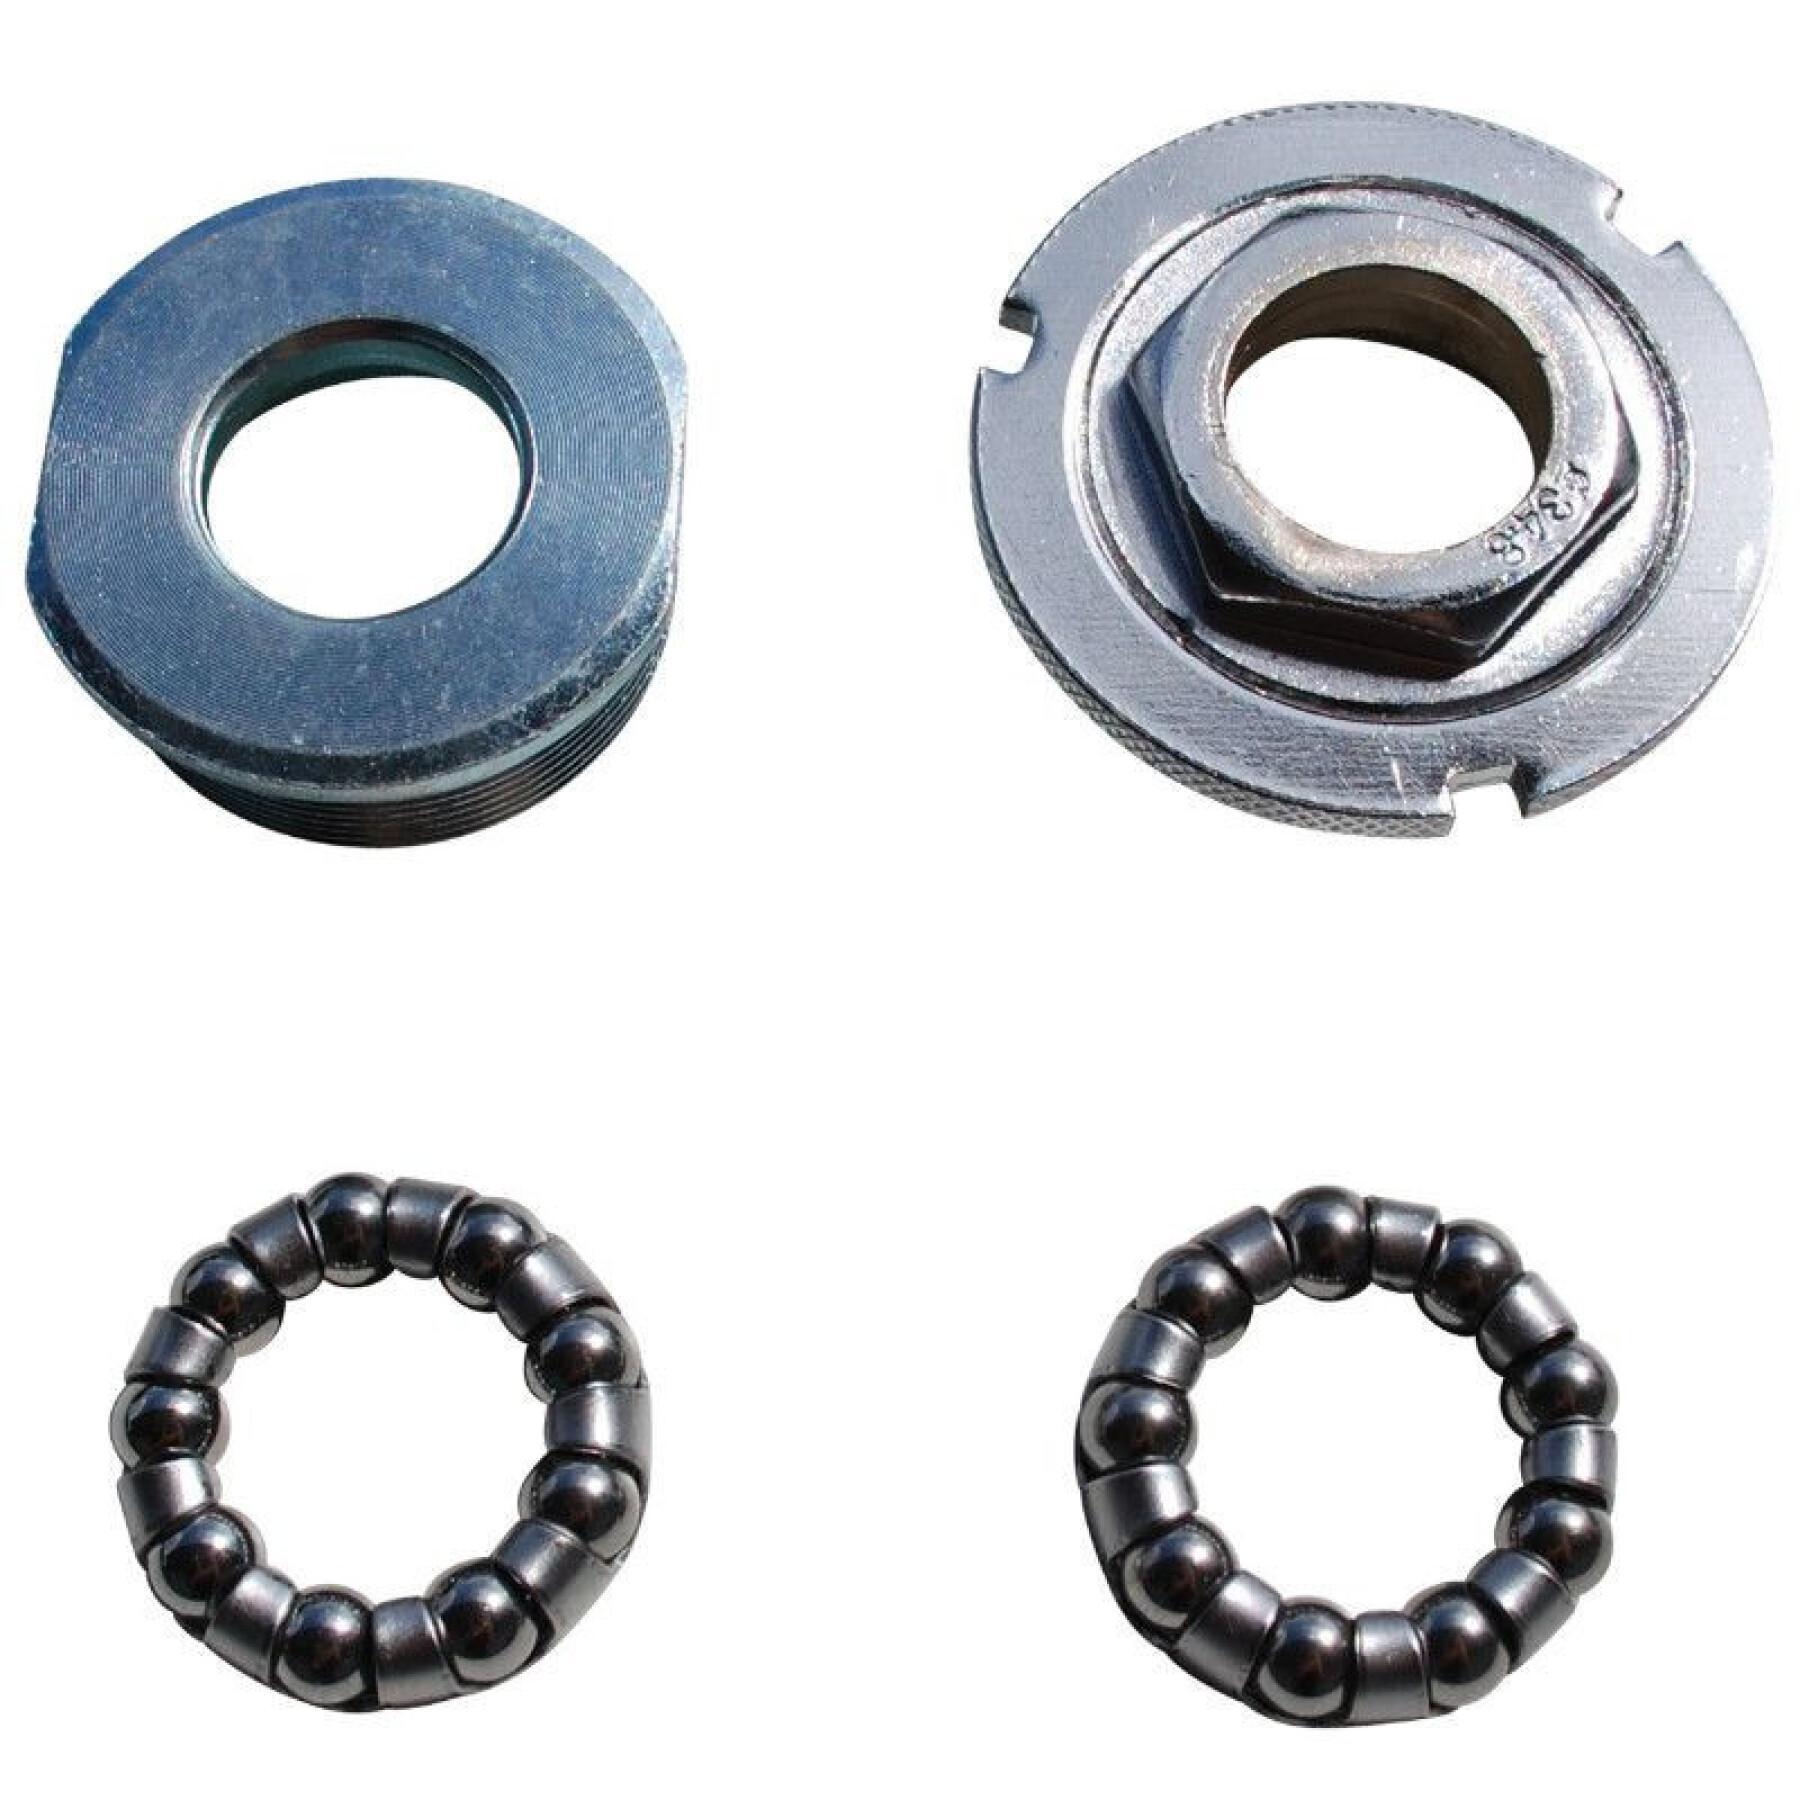 Pedal cup kit for ball cage square axle English thread P2R Bsc